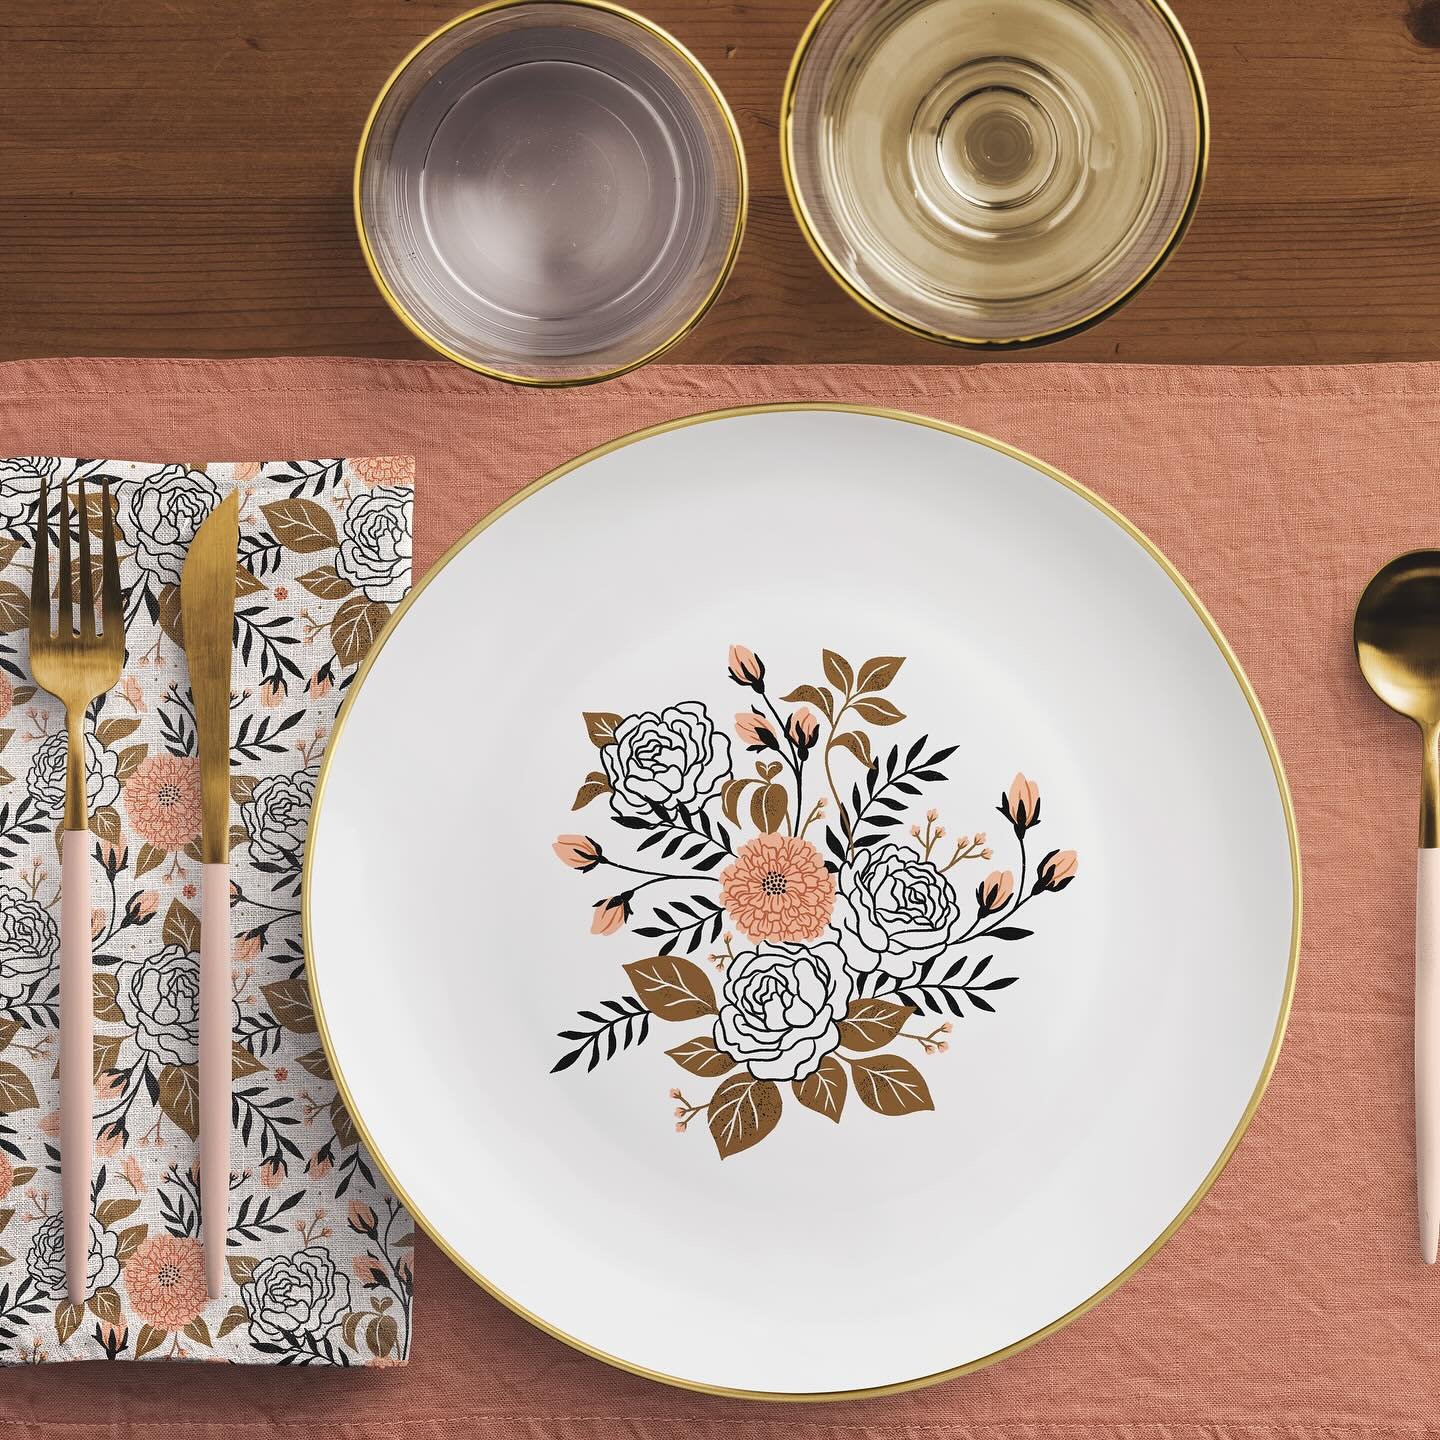 My latest ✨DREAM✨ is to see my artwork on real products! So I&rsquo;m currently manifesting that by making mockups for my portfolio. I feel like my &ldquo;Victorian Parlor&rdquo; series would make for such a fun tableware set for hosting garden parti